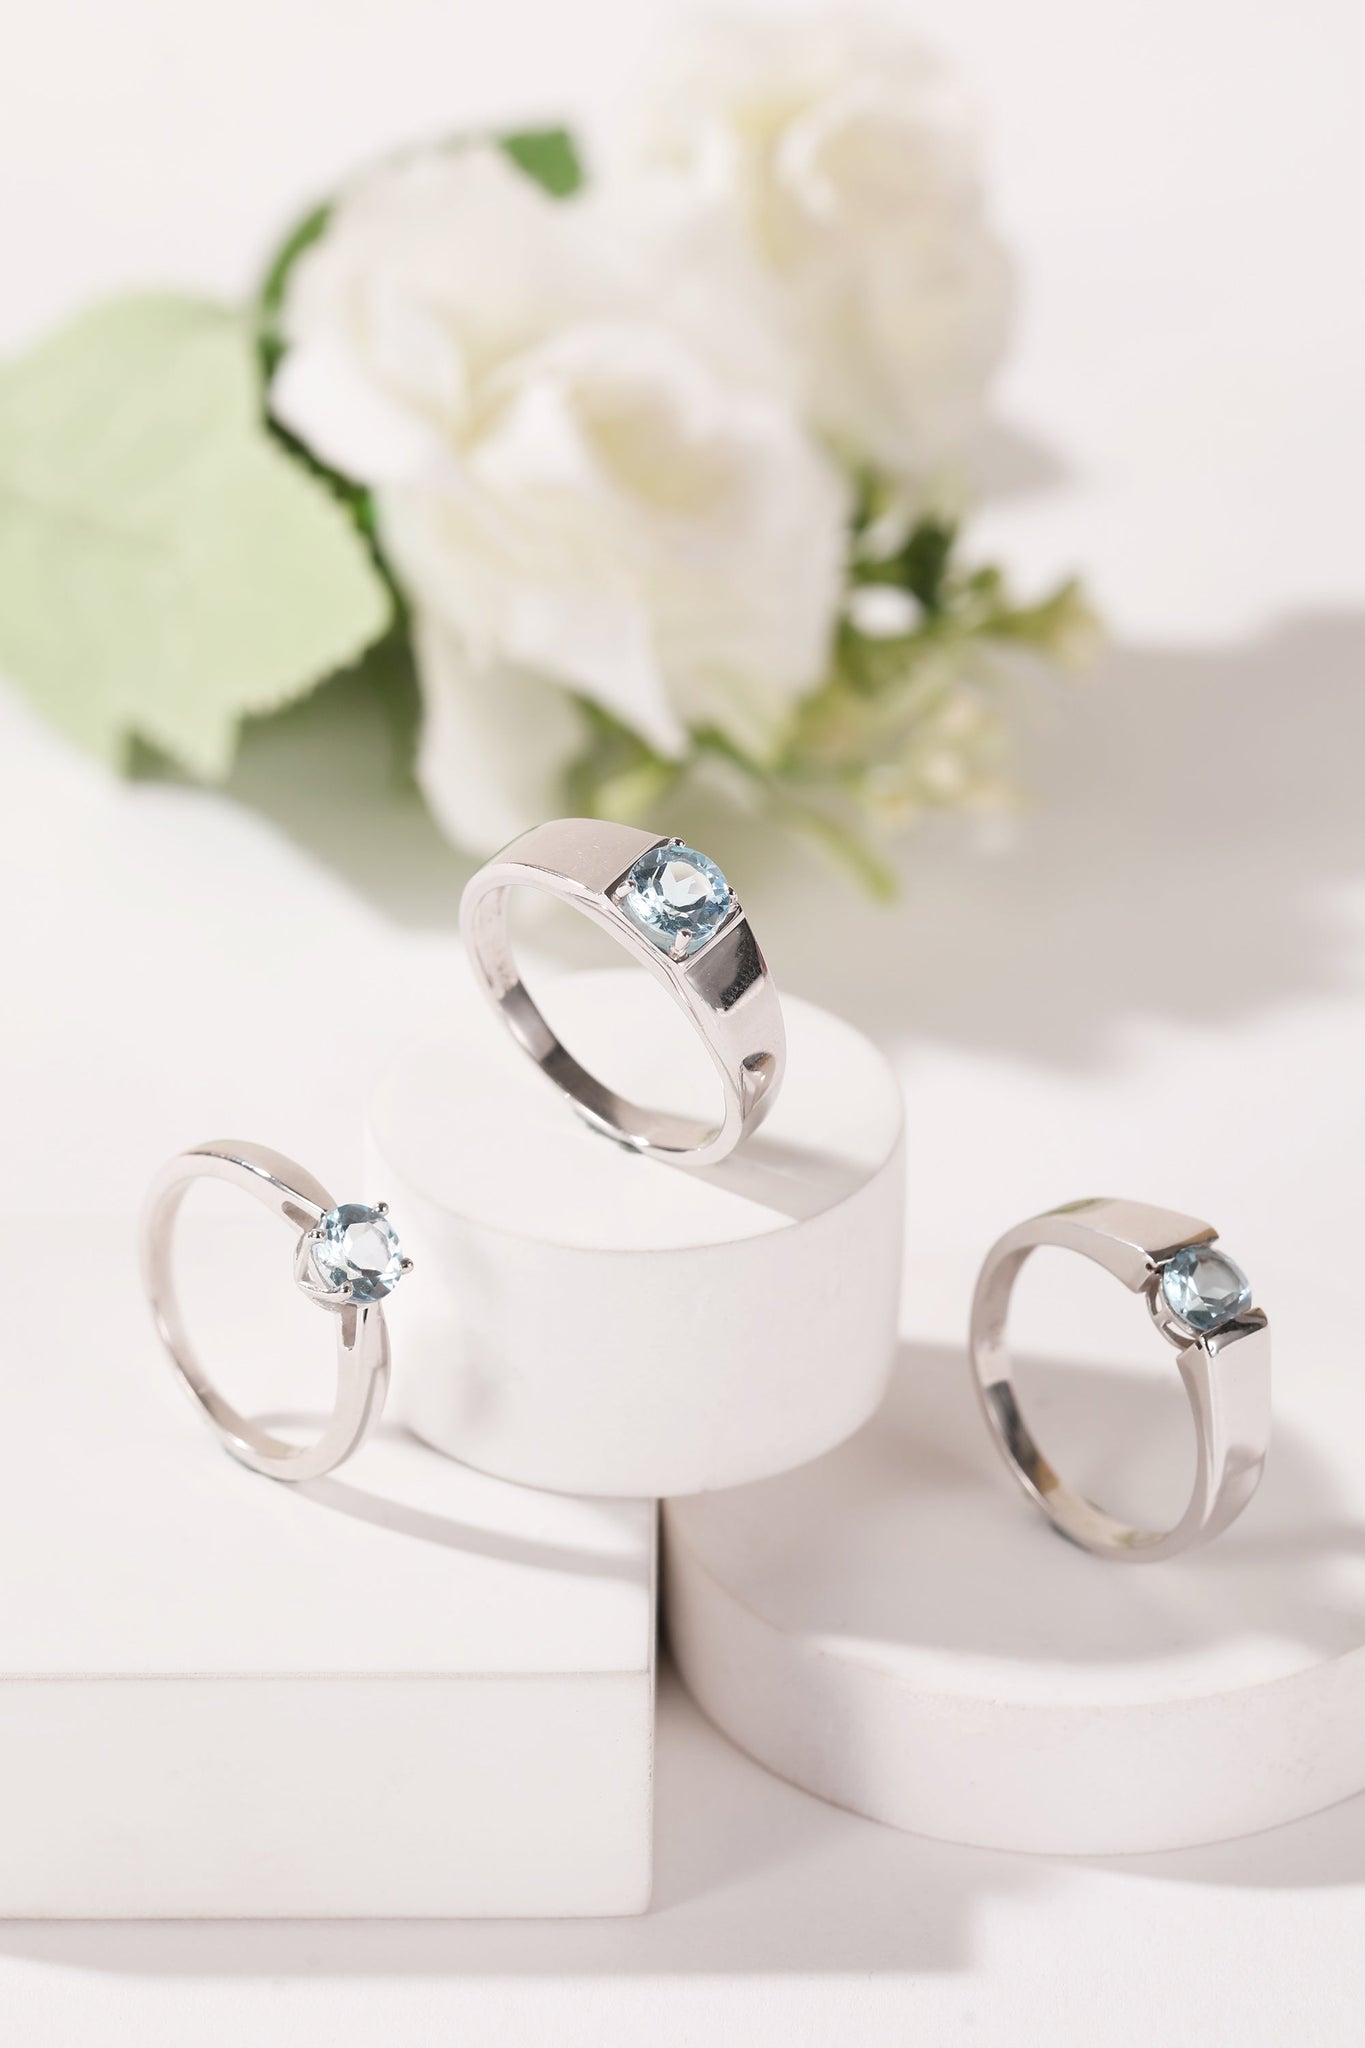 Summer Elegance: Styling 925 Sterling Silver Jewellery for the Season